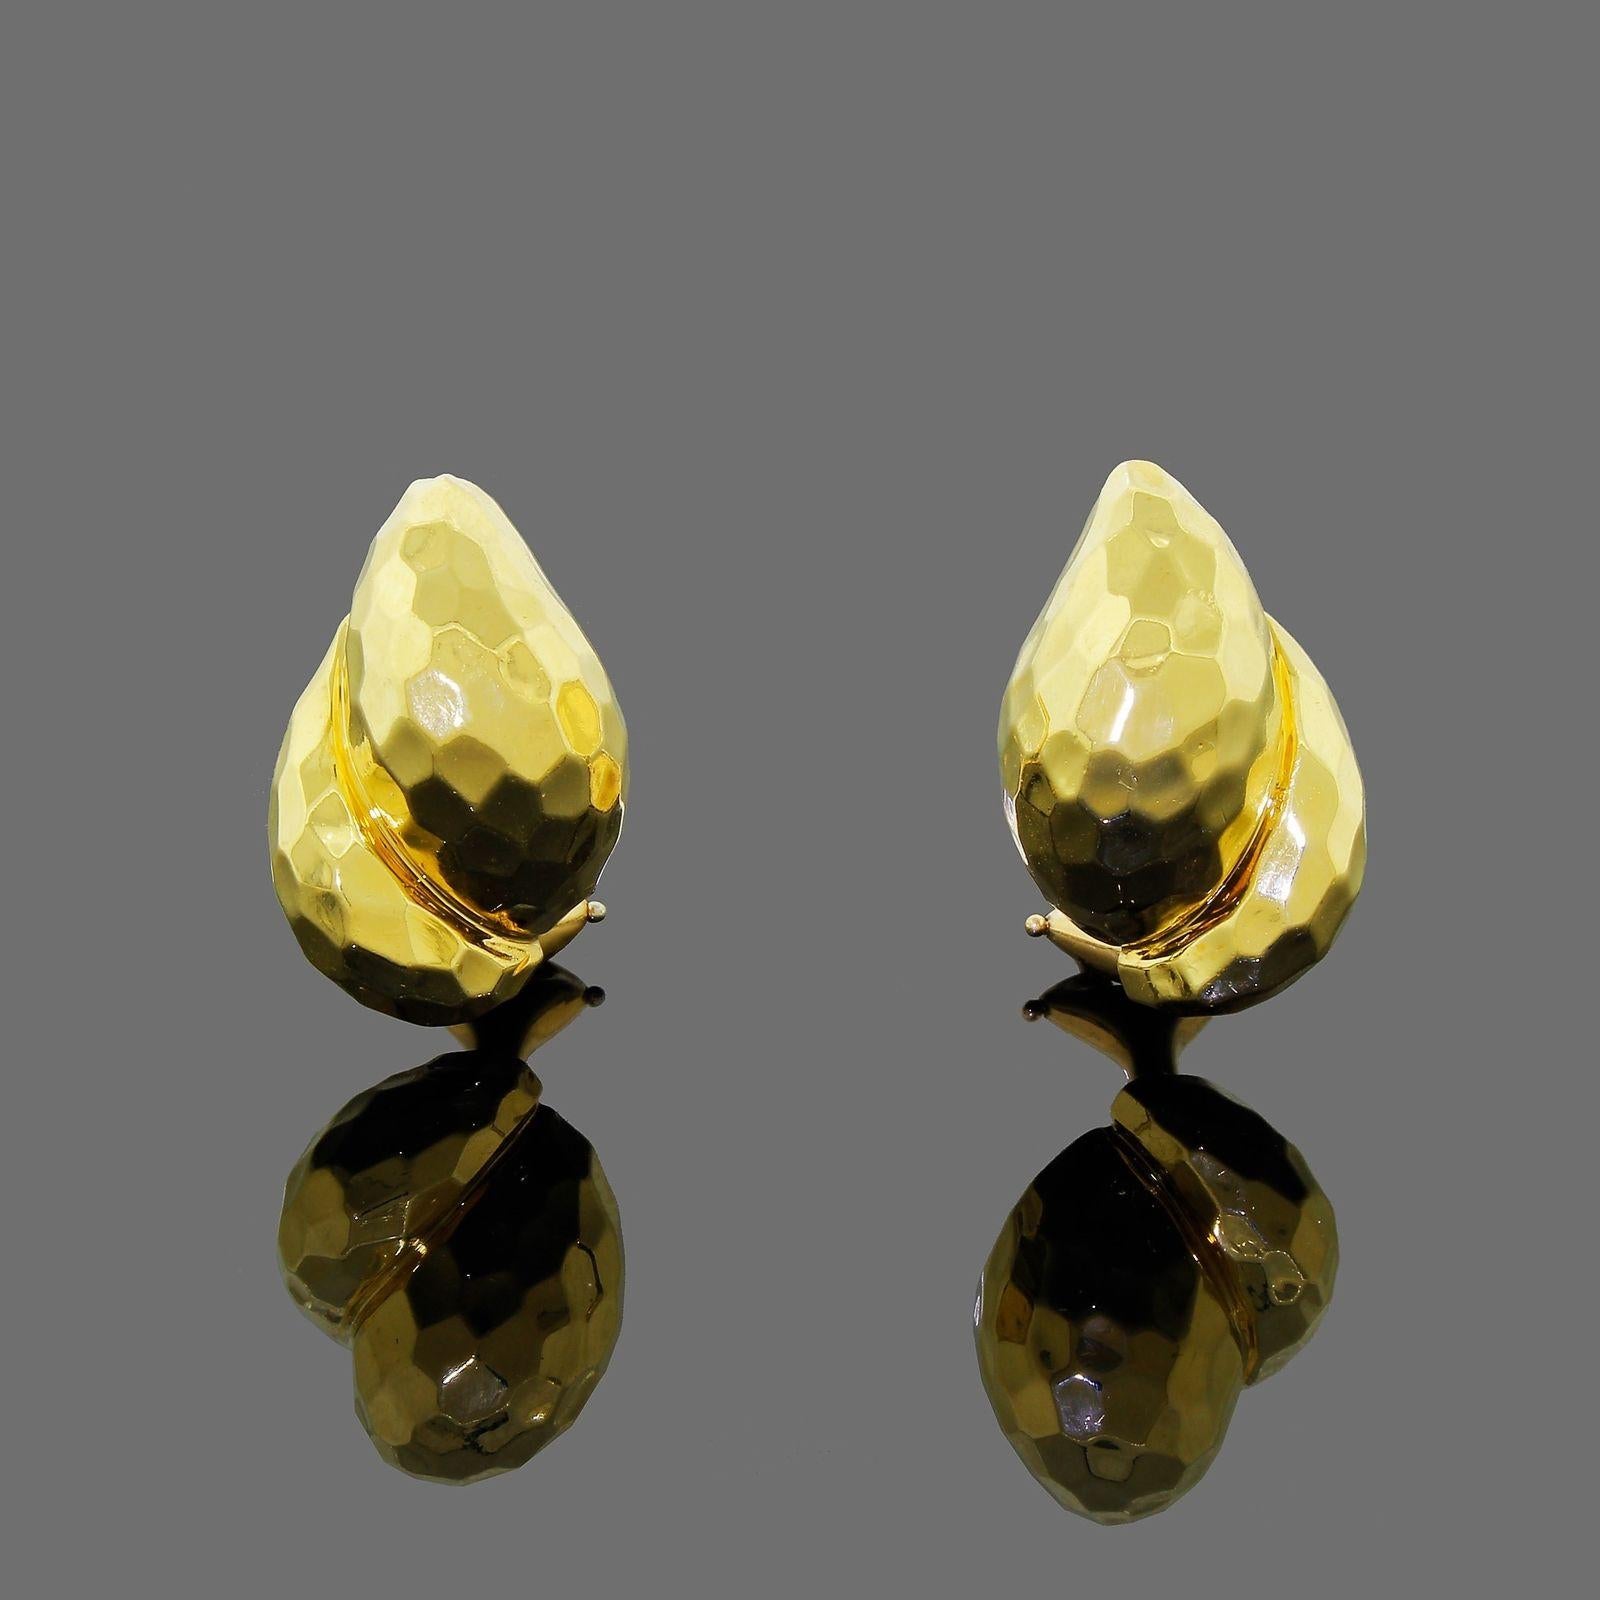 Beautiful 18k gold Henry Dunay iconic  hammered earrings in the shell design.
Excellent pre-owned condition, the faceted hammered design is bright and shiny, the clip backs work perfectly and they are nice and tight.
These earrings are clip on / for